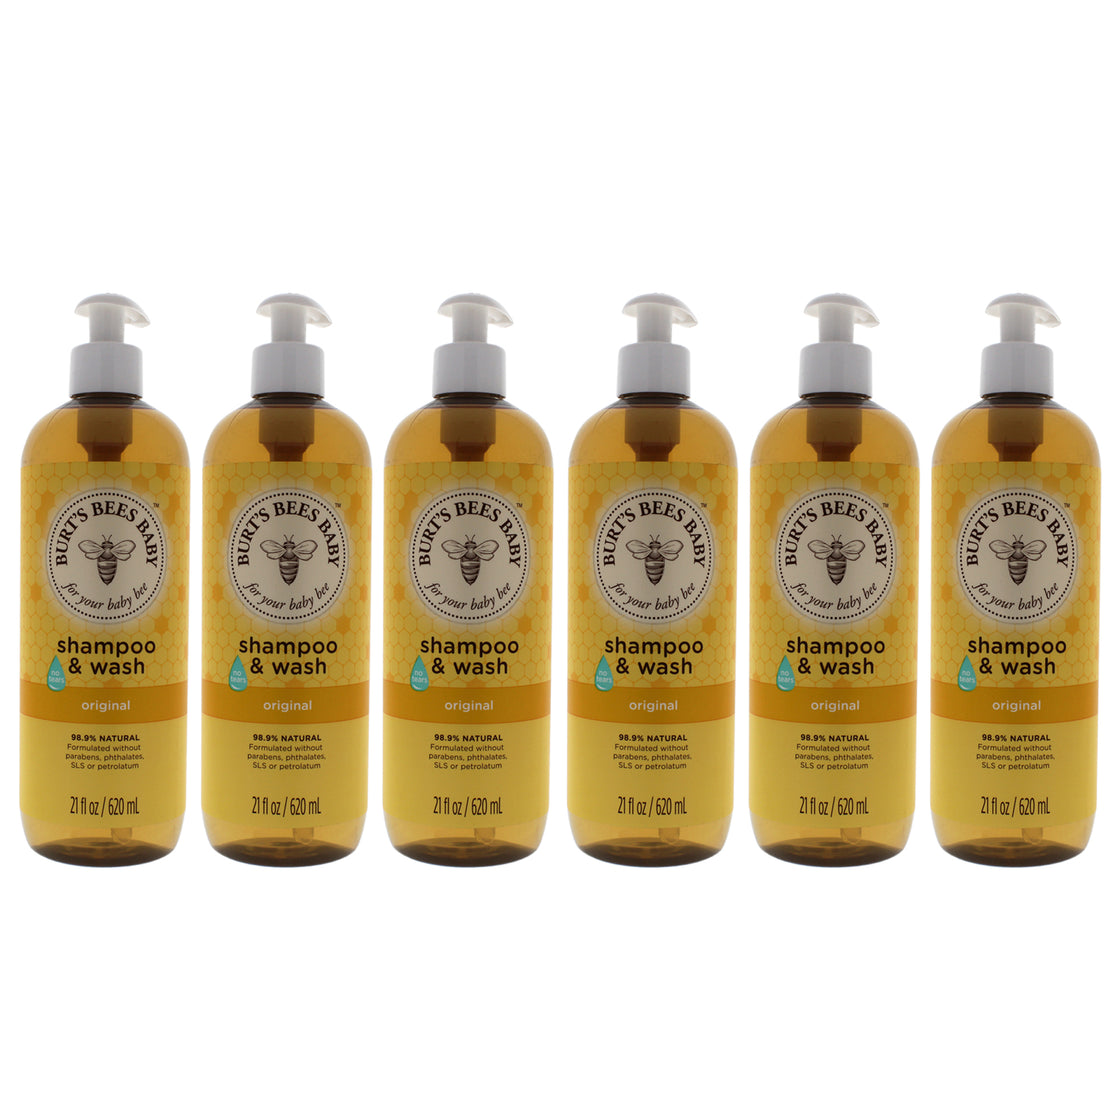 Baby Bee Shampoo and Wash Original by Burts Bees for Kids - 21 oz Shampoo and Body Wash - Pack of 6